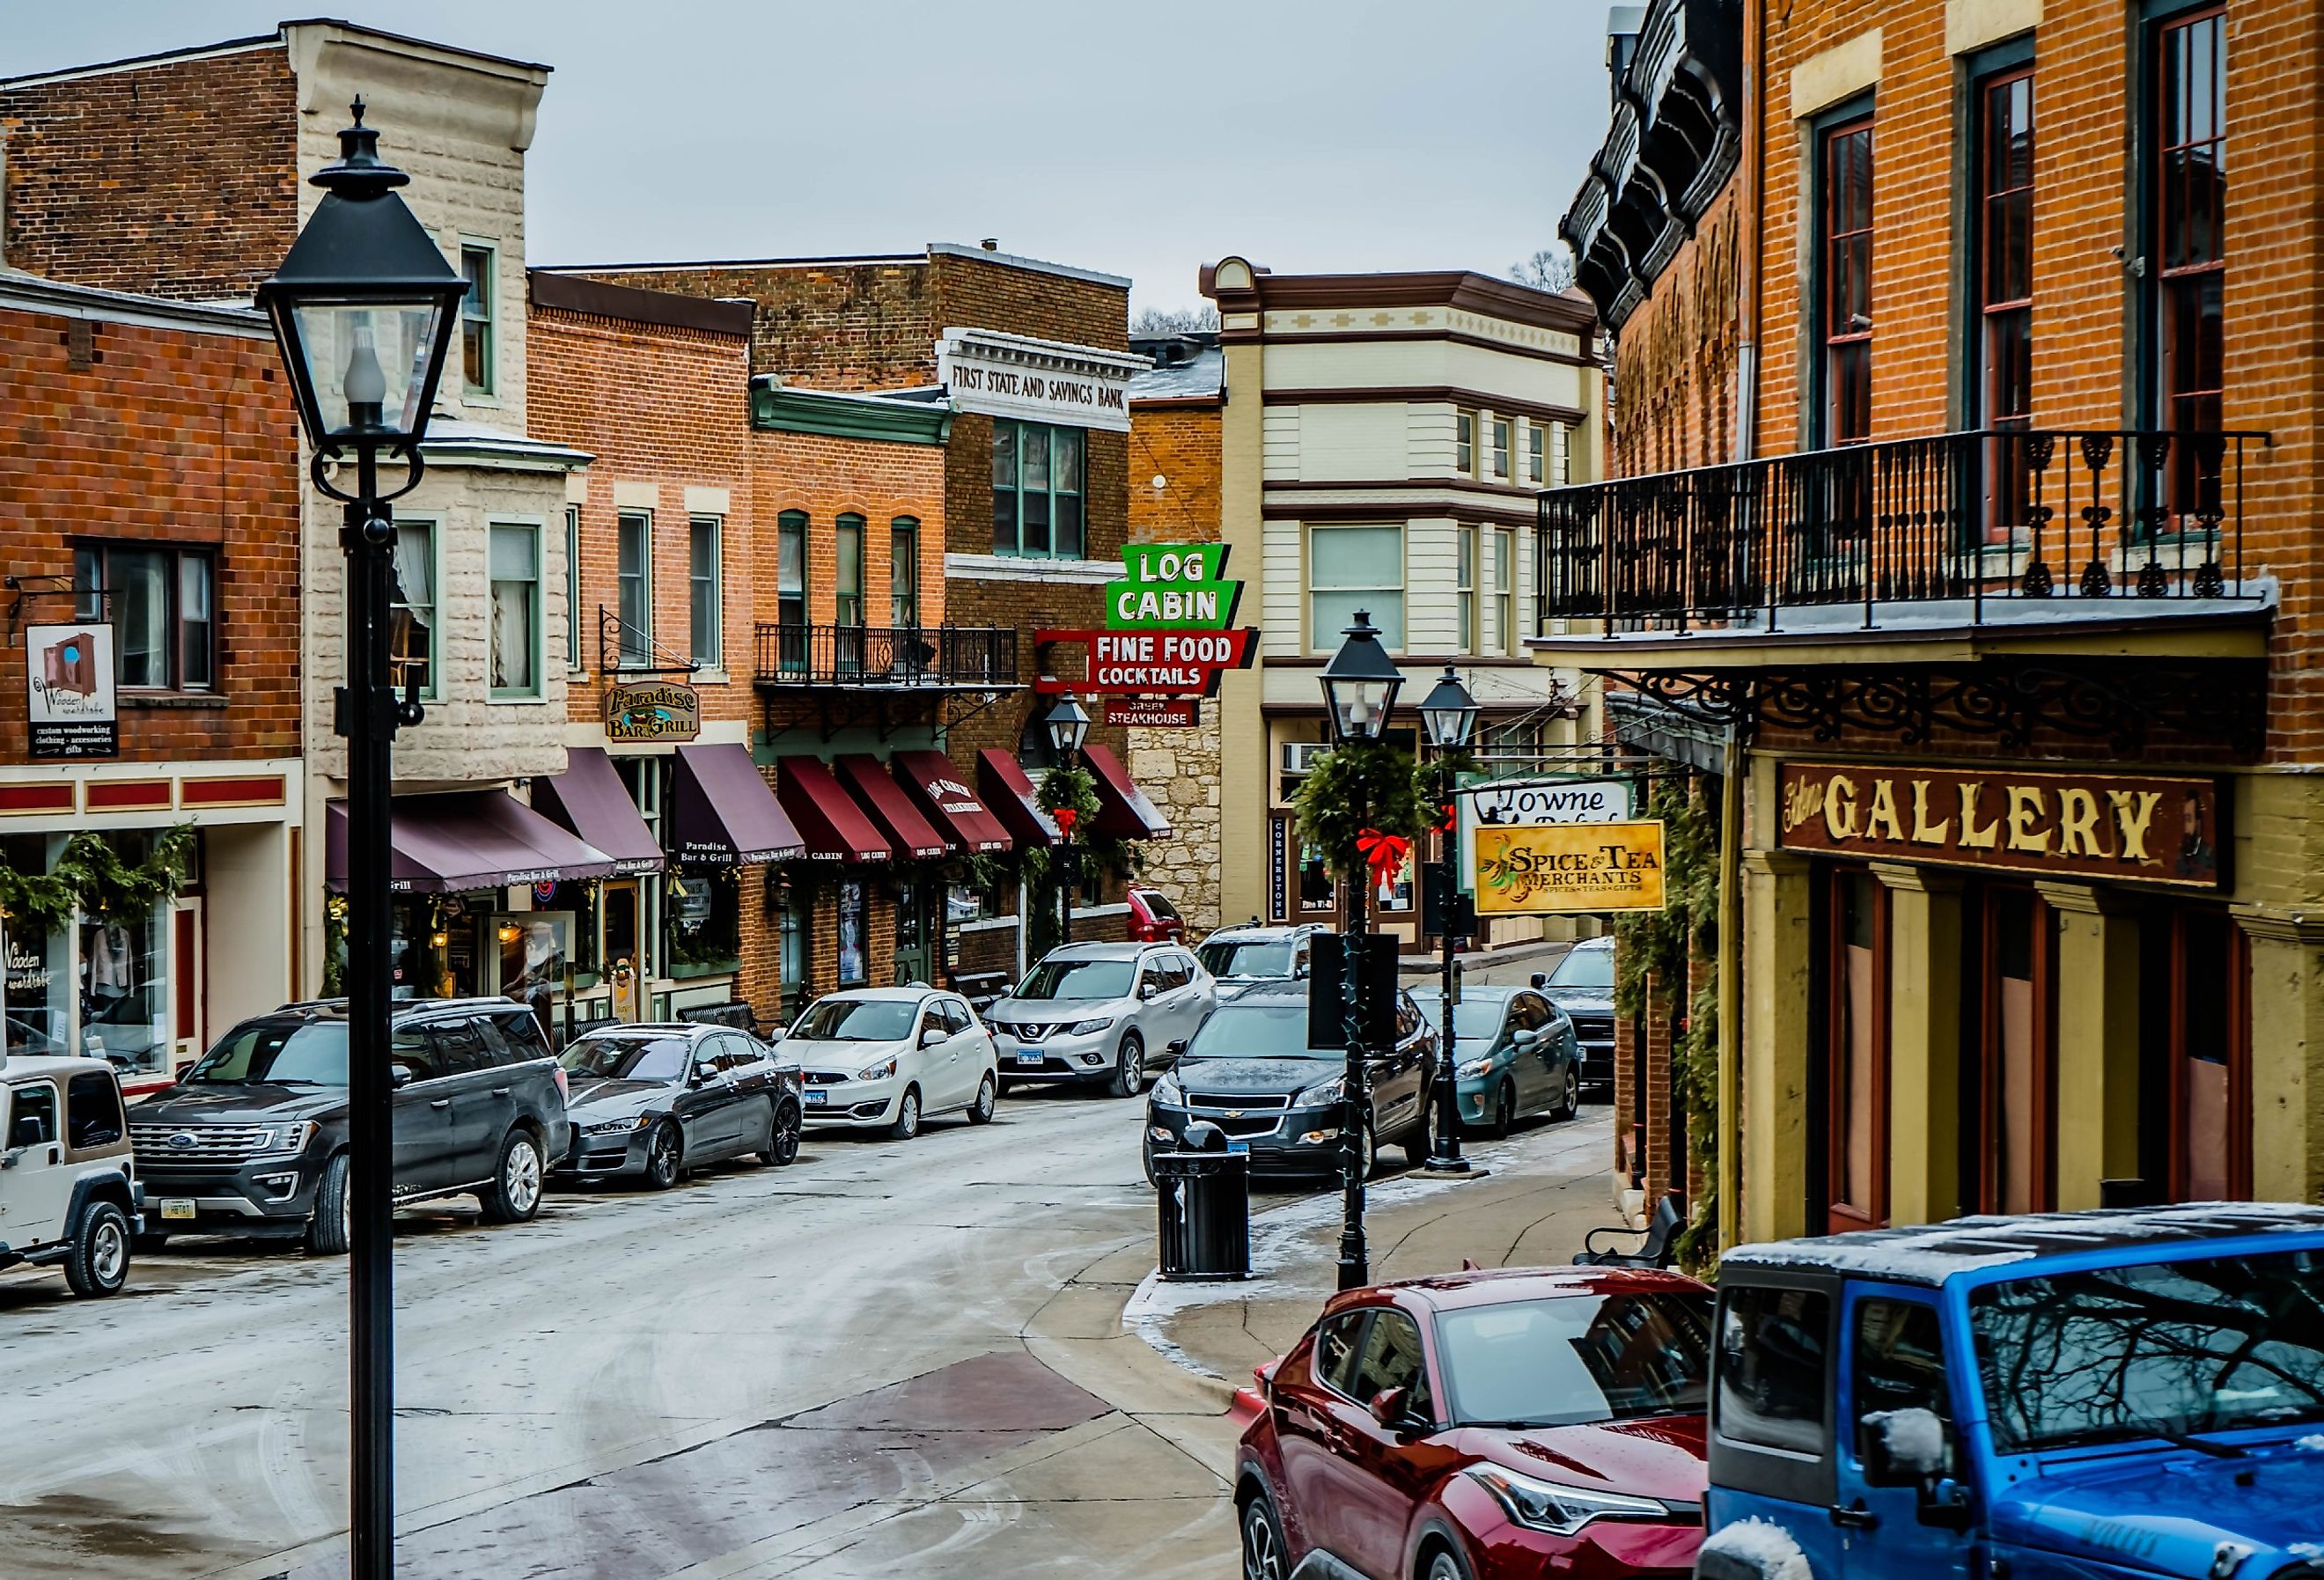 Downtown of Galena Illinois, with Christmas decorations. Image credit StelsONe via Shutterstock